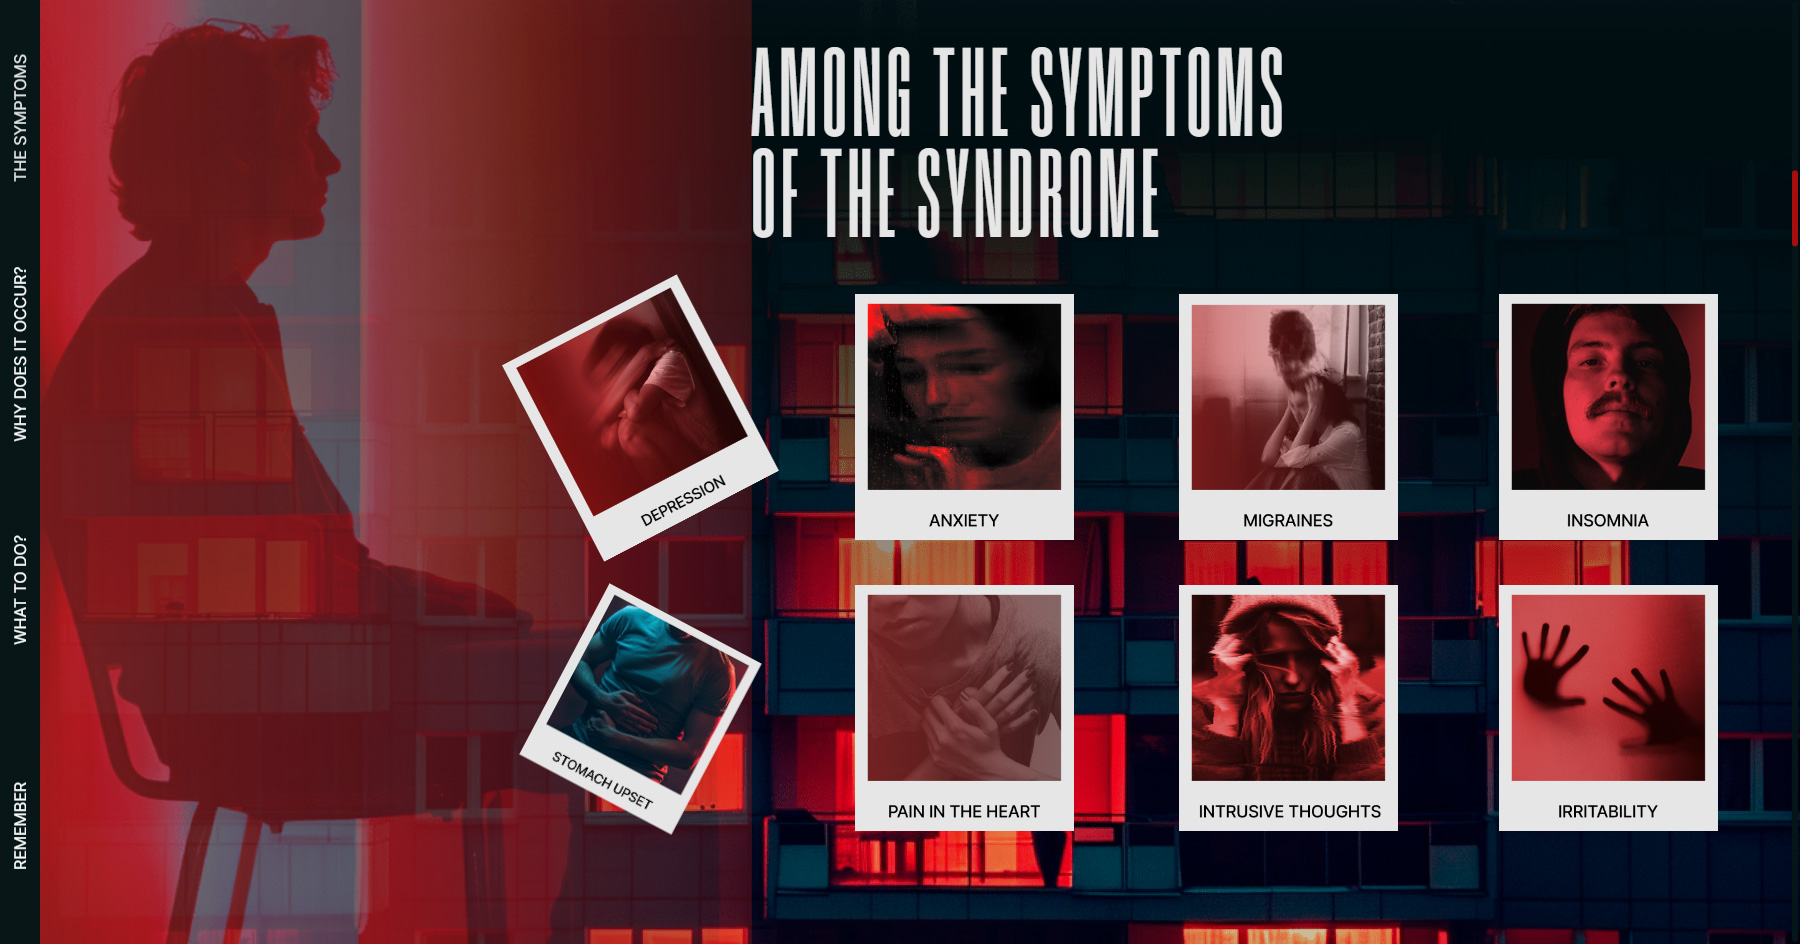 Ulysses syndrome - Website of the Day